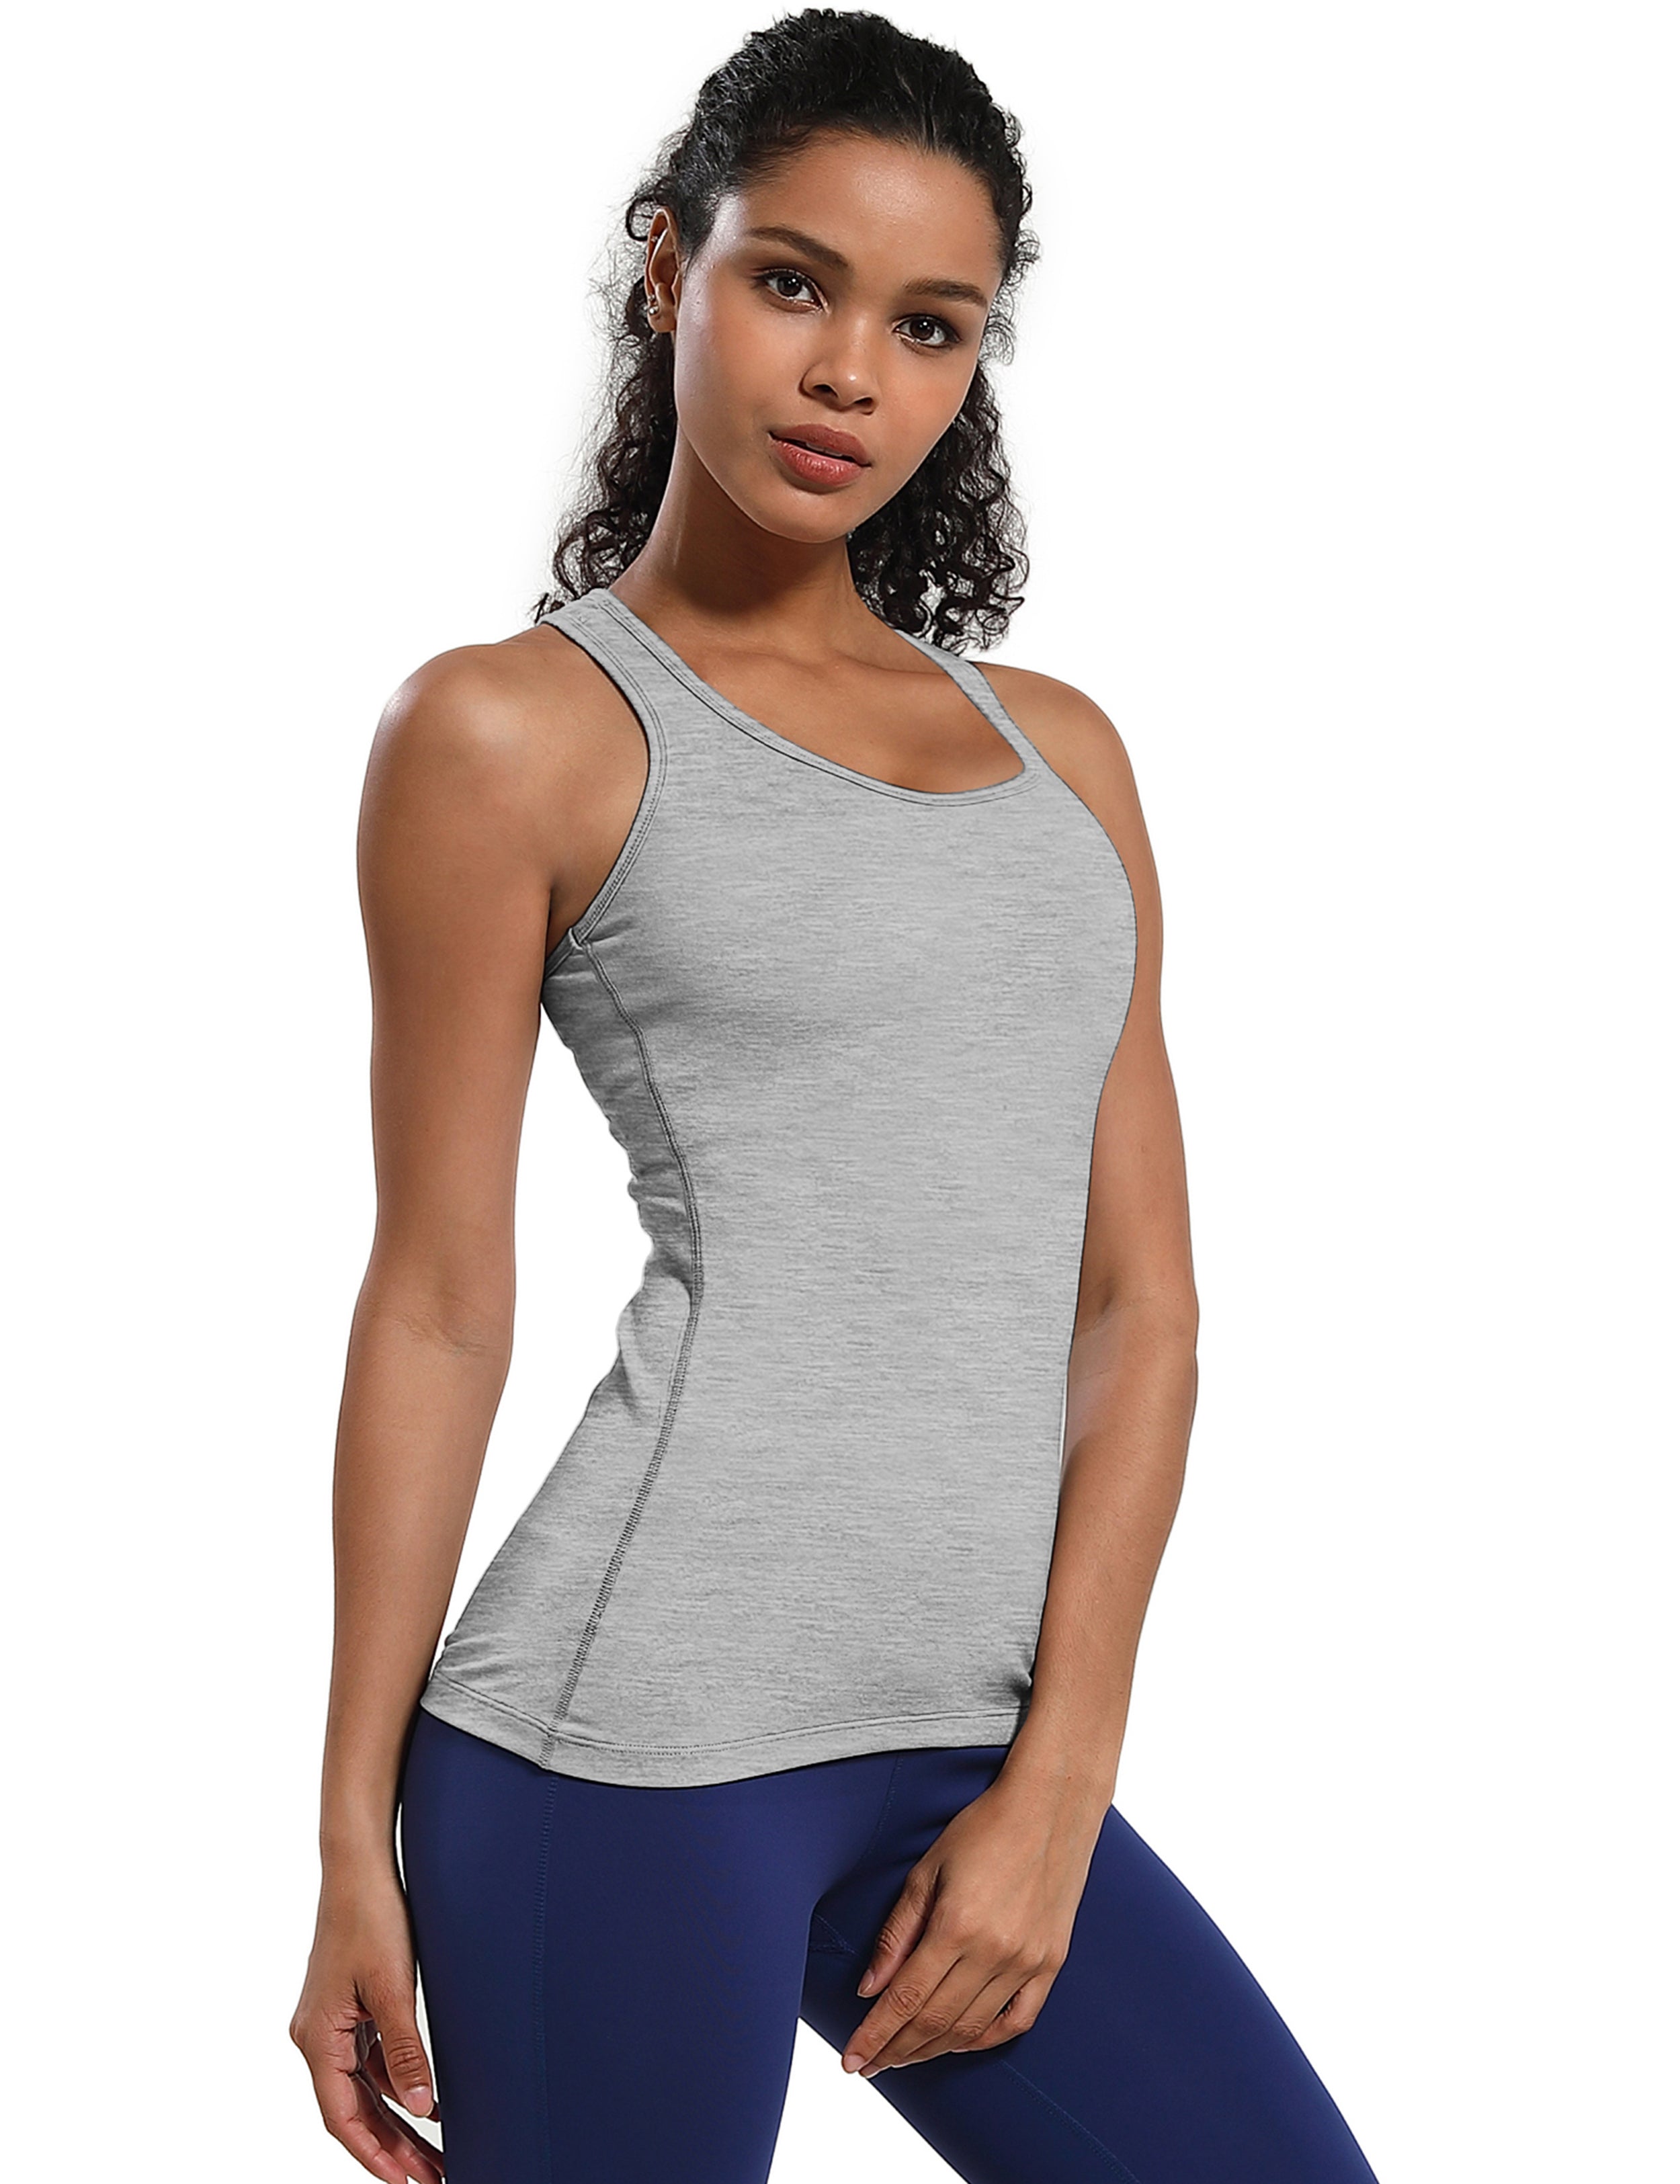 Racerback Athletic Tank Tops heathergray 92%Nylon/8%Spandex(Cotton Soft) Designed for Golf Tight Fit So buttery soft, it feels weightless Sweat-wicking Four-way stretch Breathable Contours your body Sits below the waistband for moderate, everyday coverage